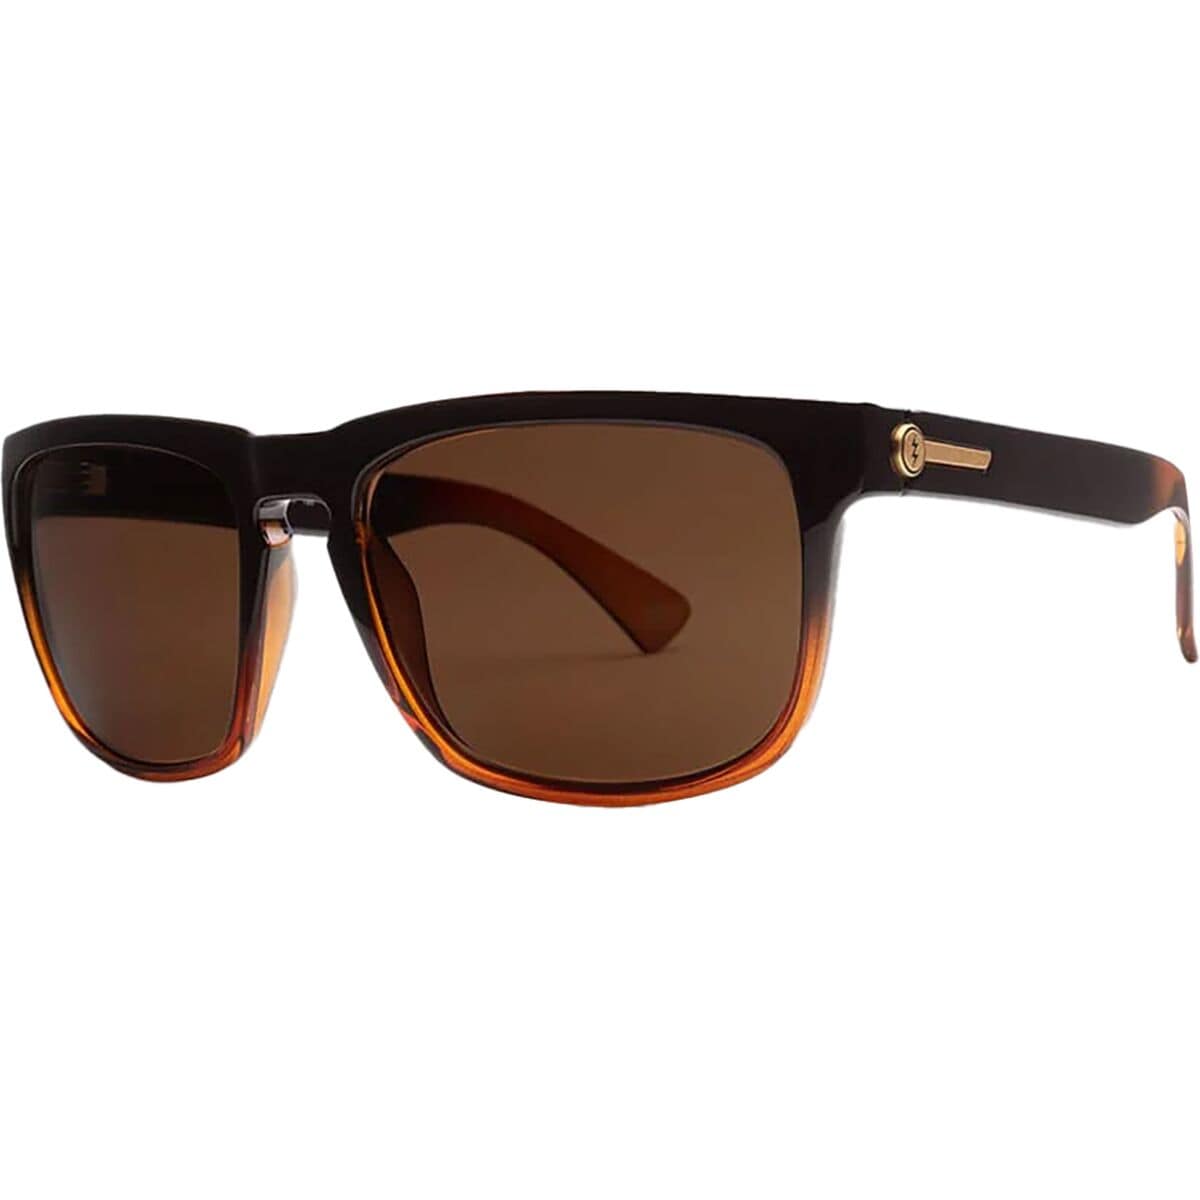 Photos - Sunglasses Electric Knoxville Polarized  